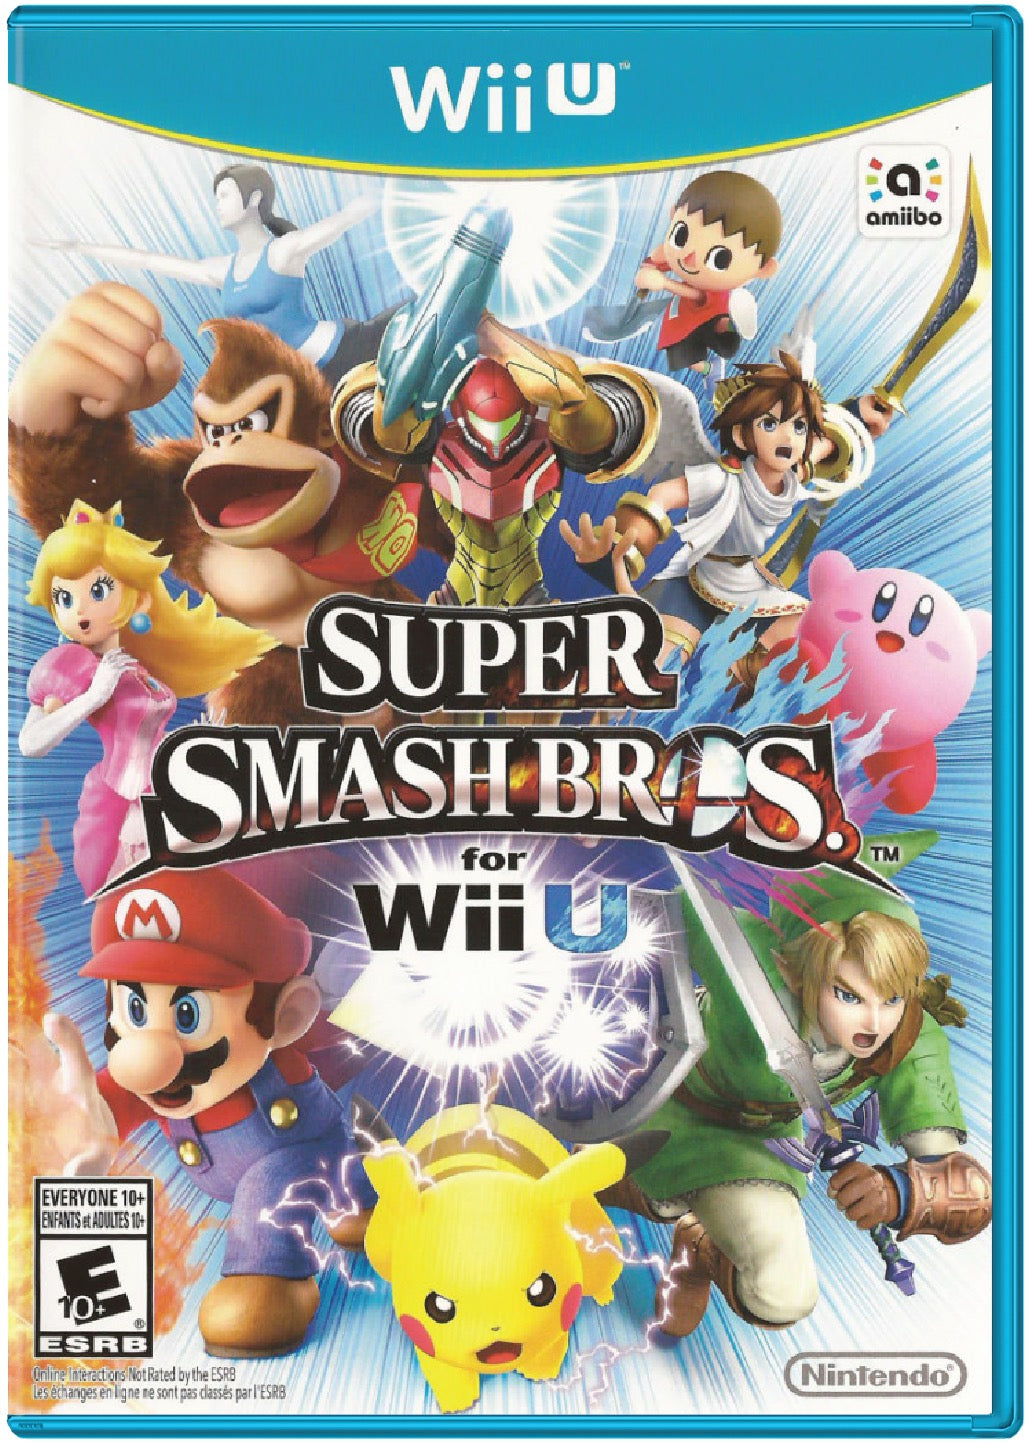 Super Smash Bros. Cover Art and Product Photo